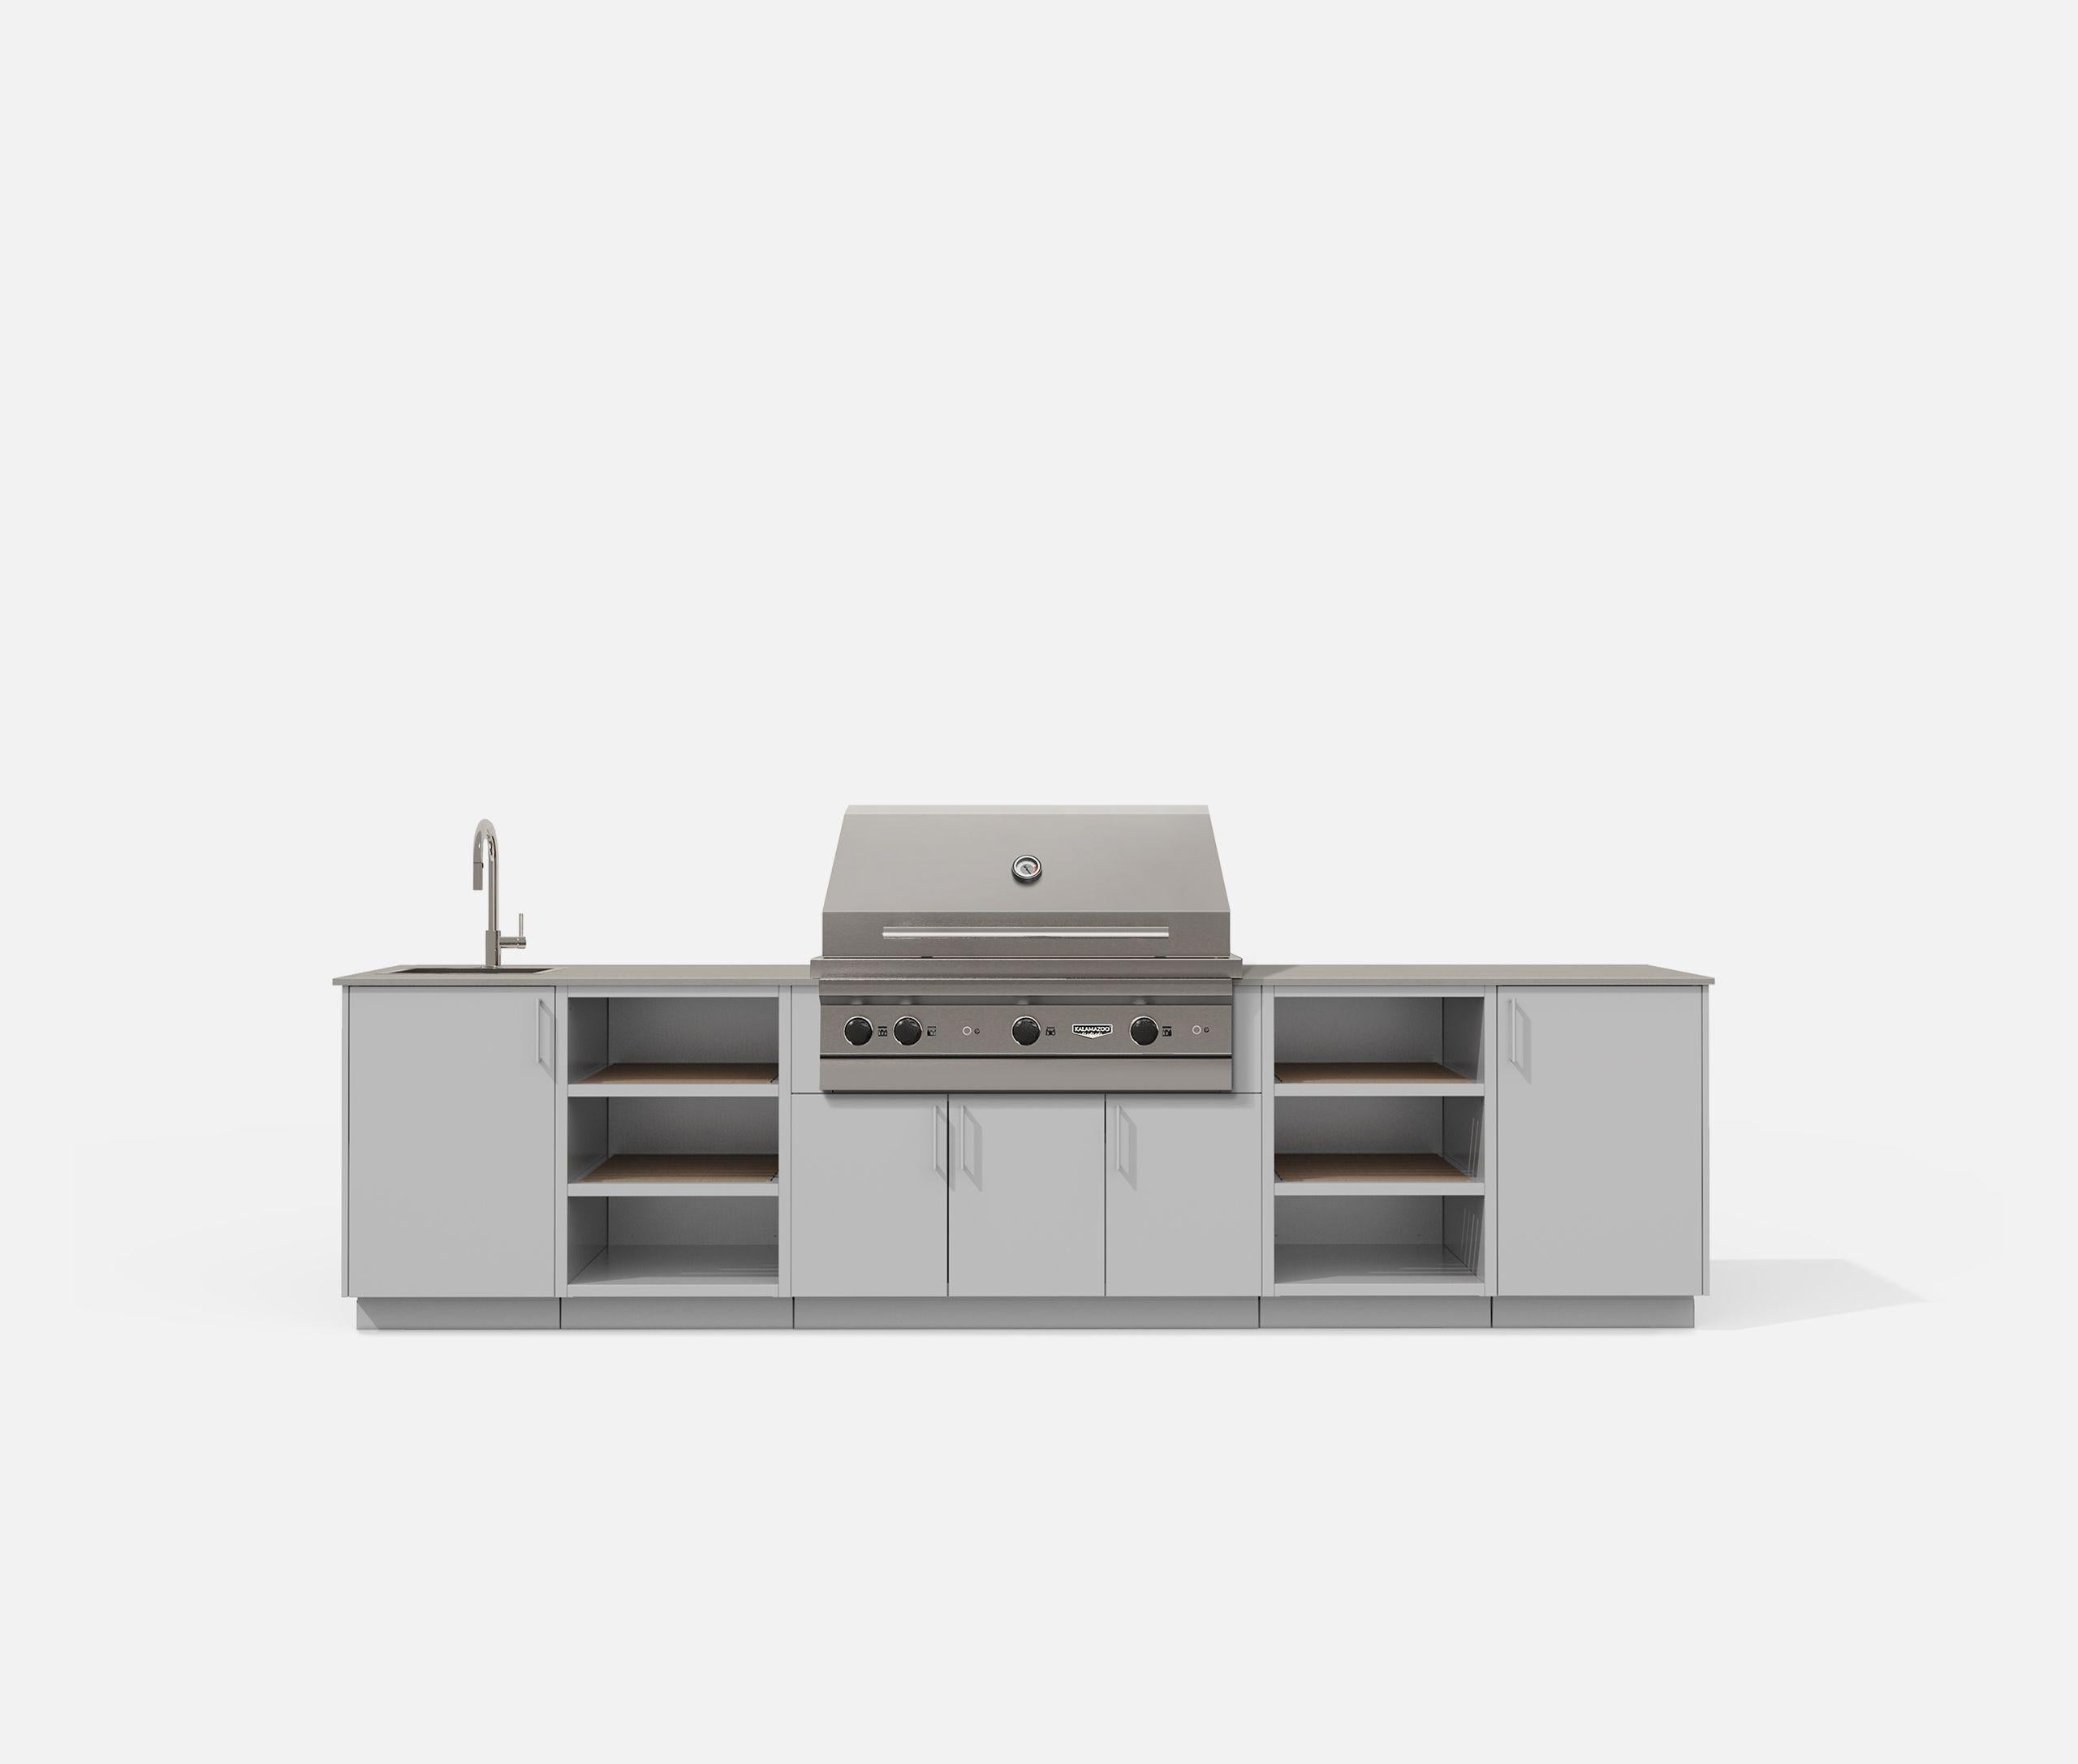 Urban Bonfire CTWILIGHT42CHANTILLY Twilight 42 Outdoor Kitchen (Chantilly) GRILL SOLD SEPARATELY